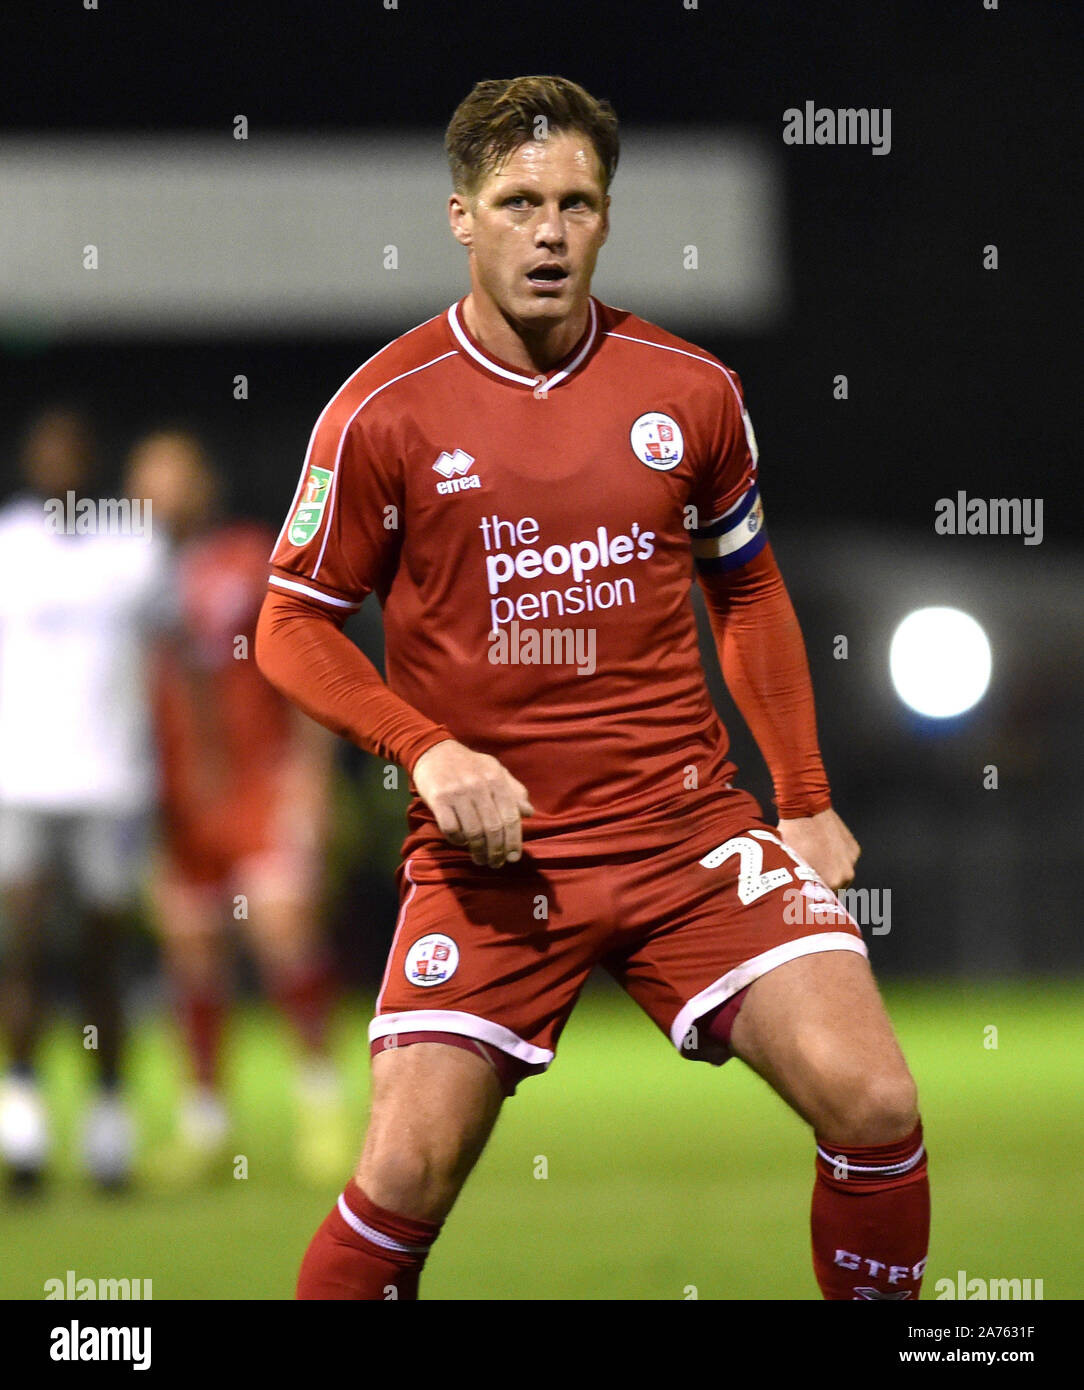 Dannie Bulman of Crawley who is one of the oldest professional footballers playing during the Carabao Cup fourth round match between Crawley Town and Colchester United at the People's Pension Stadium , Crawley , 29 October 2019 - Editorial use only. No merchandising. For Football images FA and Premier League restrictions apply inc. no internet/mobile usage without FAPL license - for details contact Football Dataco  : Stock Photo